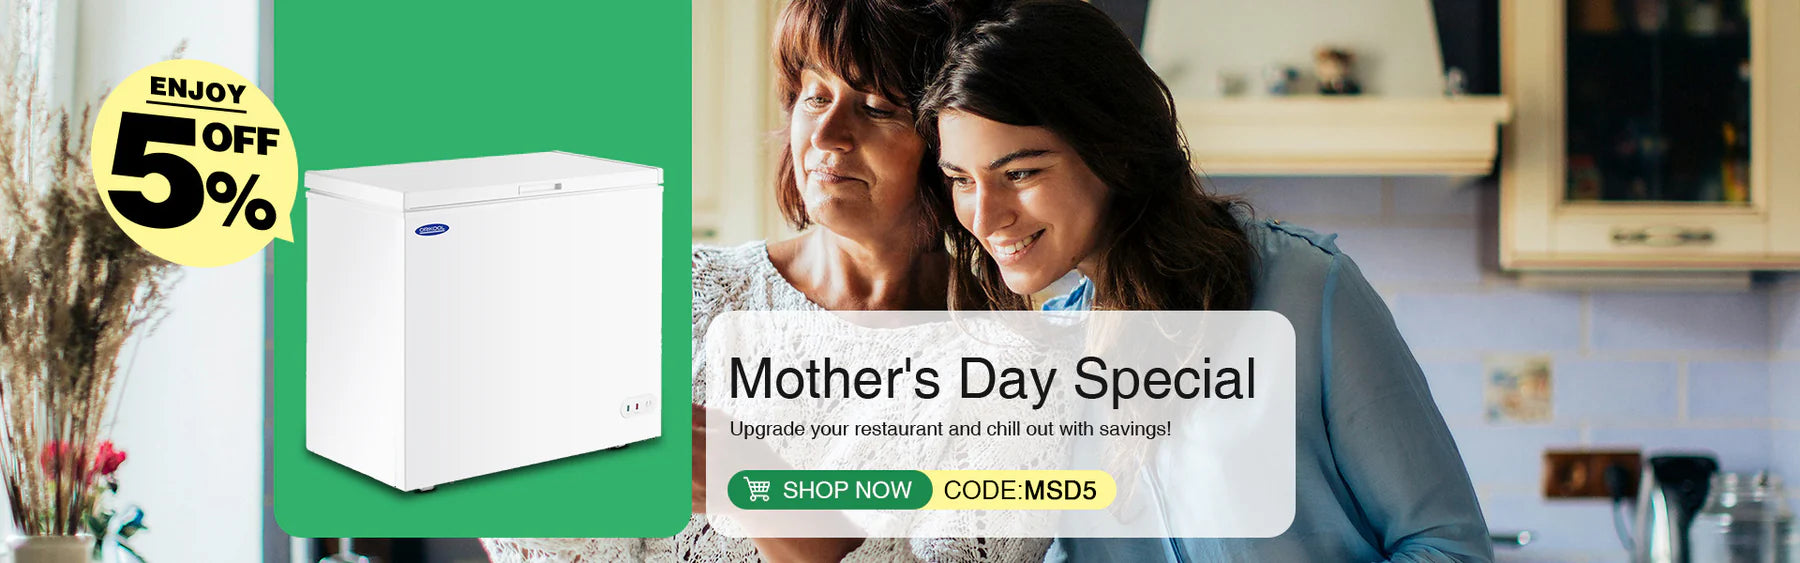 Cool Gift Ideas for Mother's Day: The Perfect Addition to Mom's Kitchen